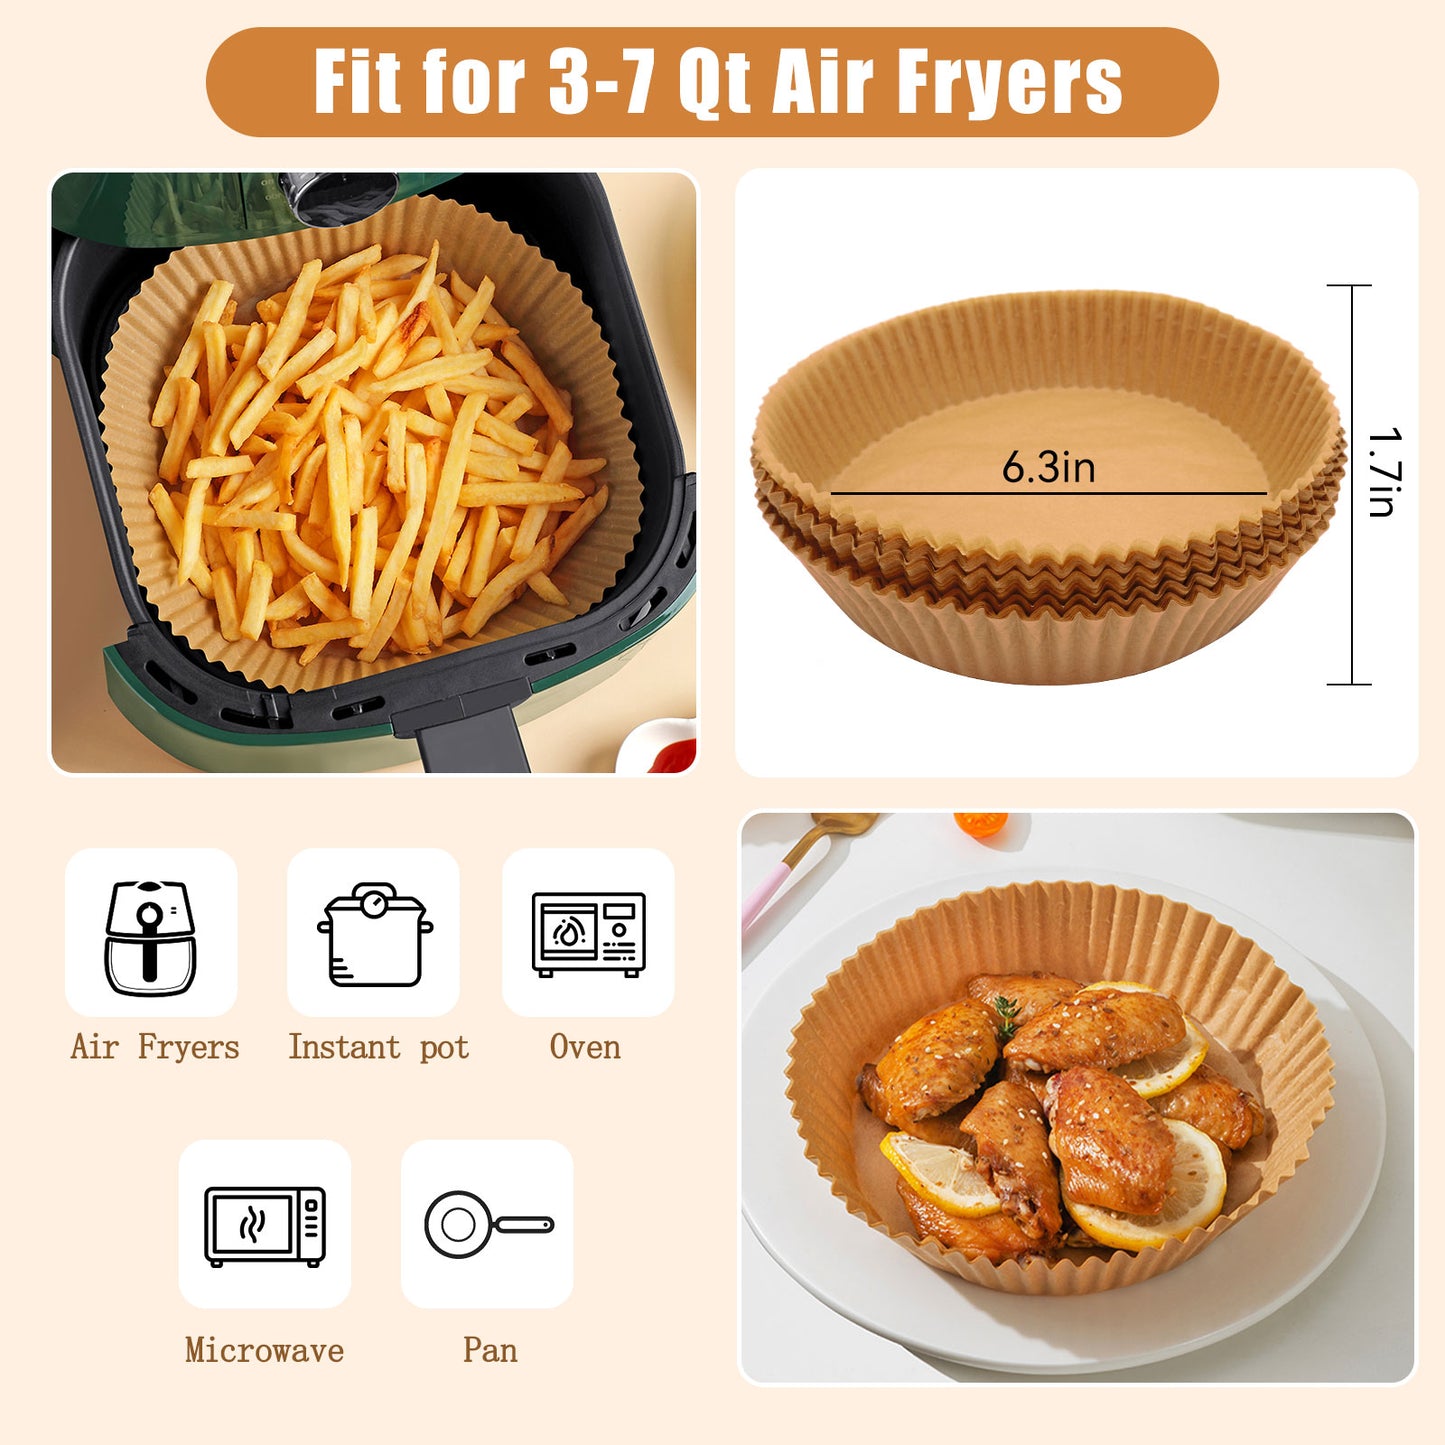 Air Fryer Disposable Paper 100 Pcs 6.3inch Round Non-Stick Prime Oil-proof Parchment Liners Cooking Paper for Fryers Basket Frying Pan Microwave Oven